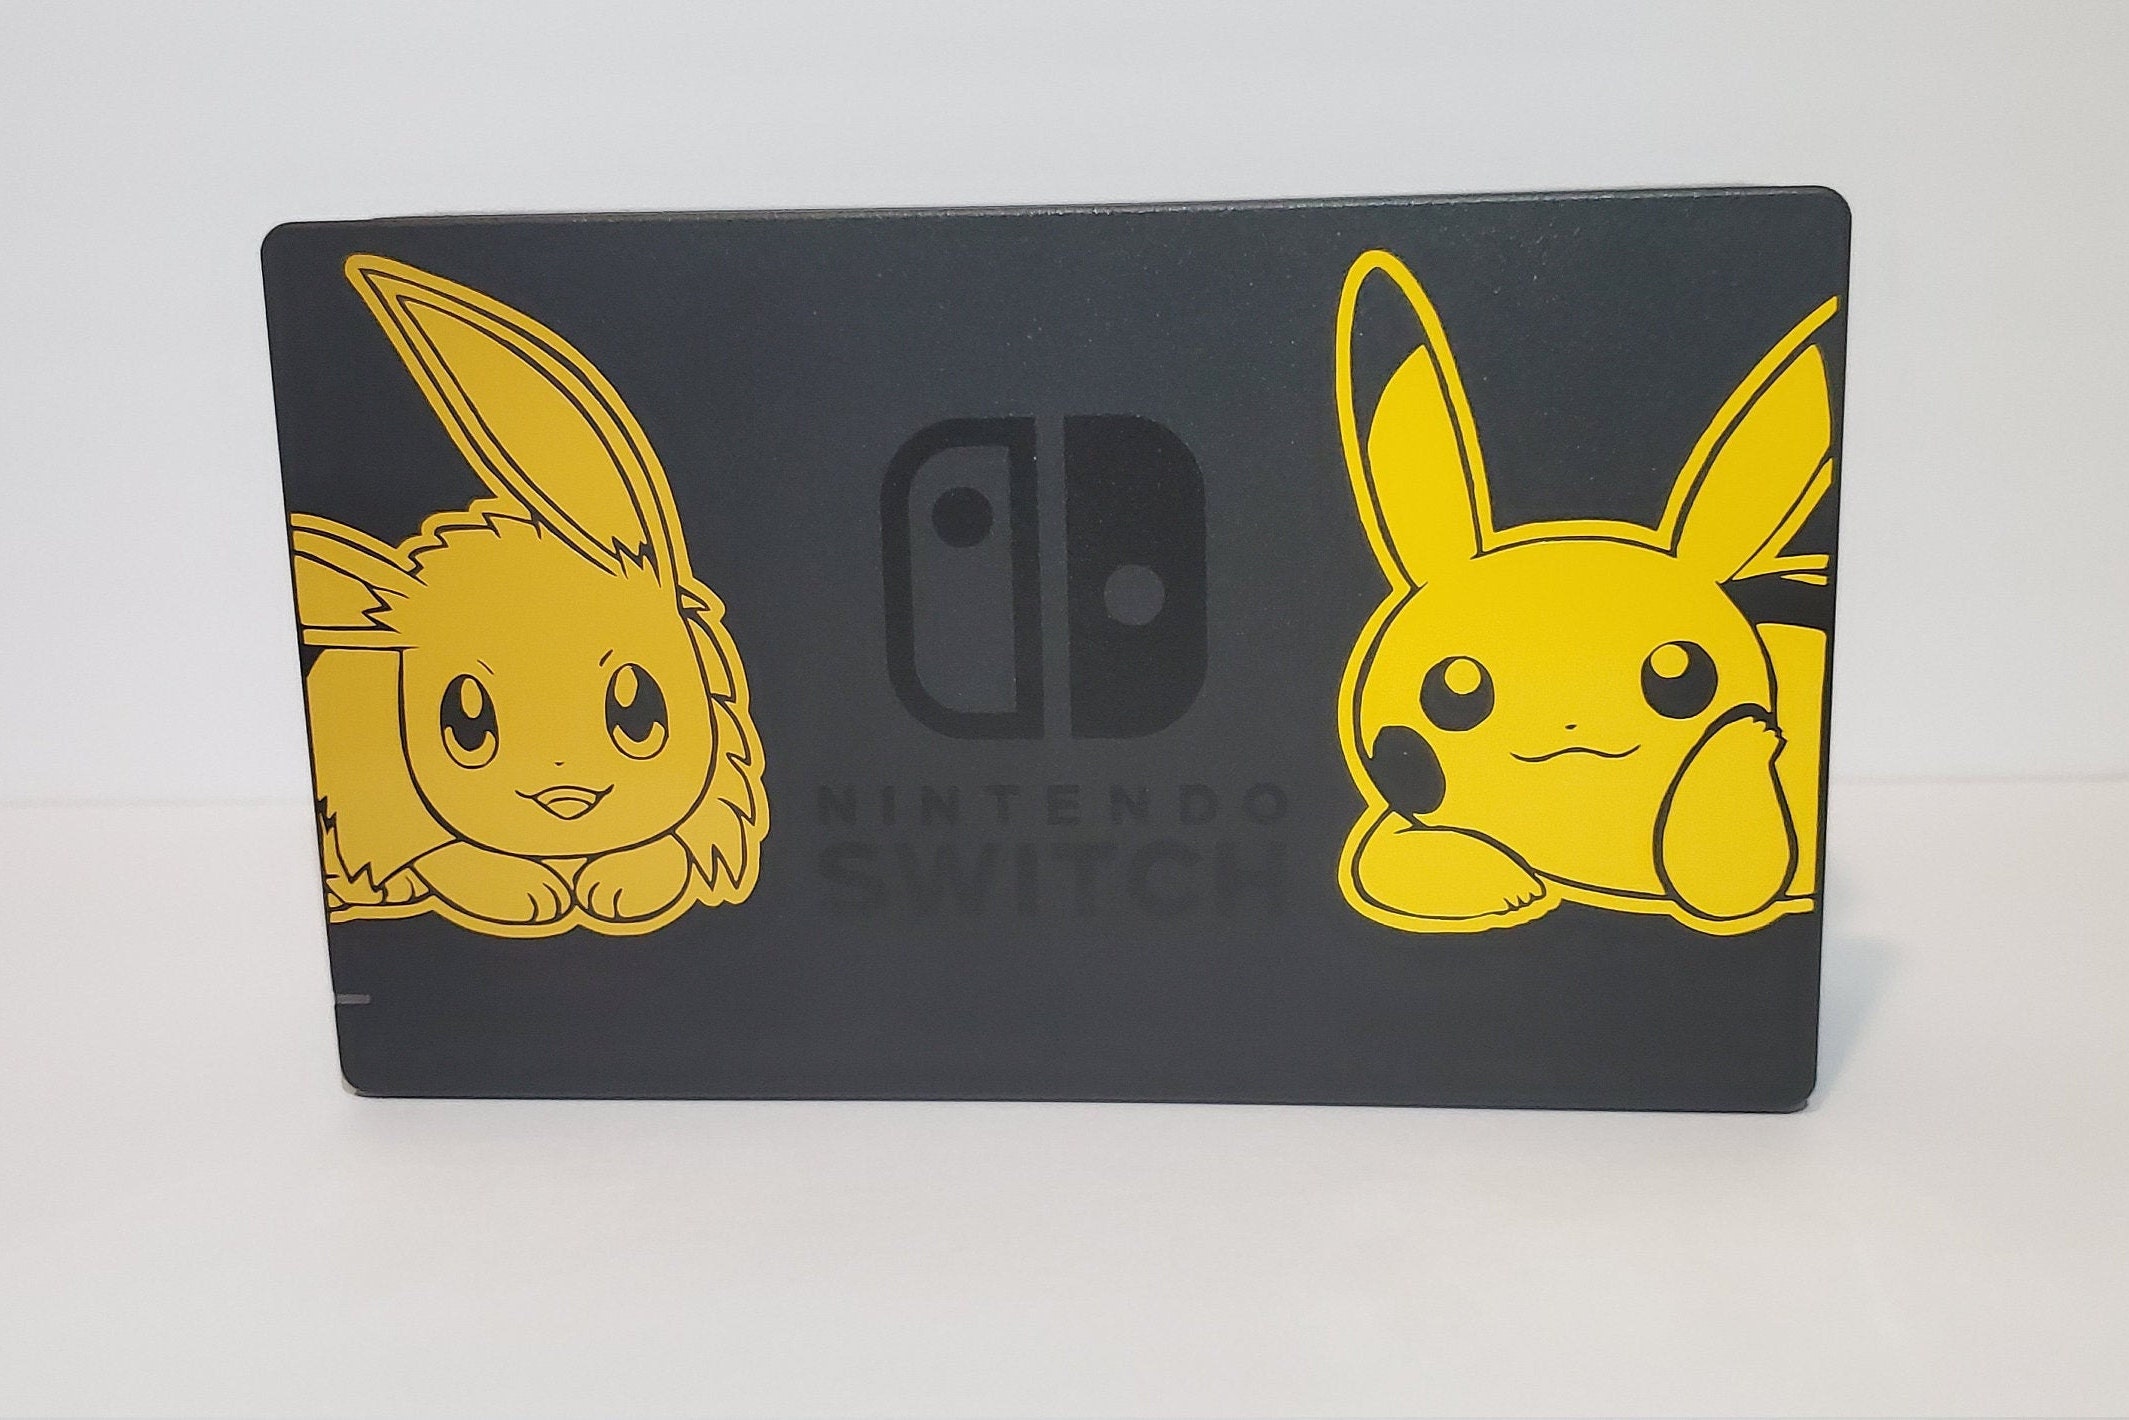 I've never been able to afford a Pokemon-themed Switch, so I decided I make  my own :D It's just a vinyl sticker that I cut and coloured in some black  parts, the